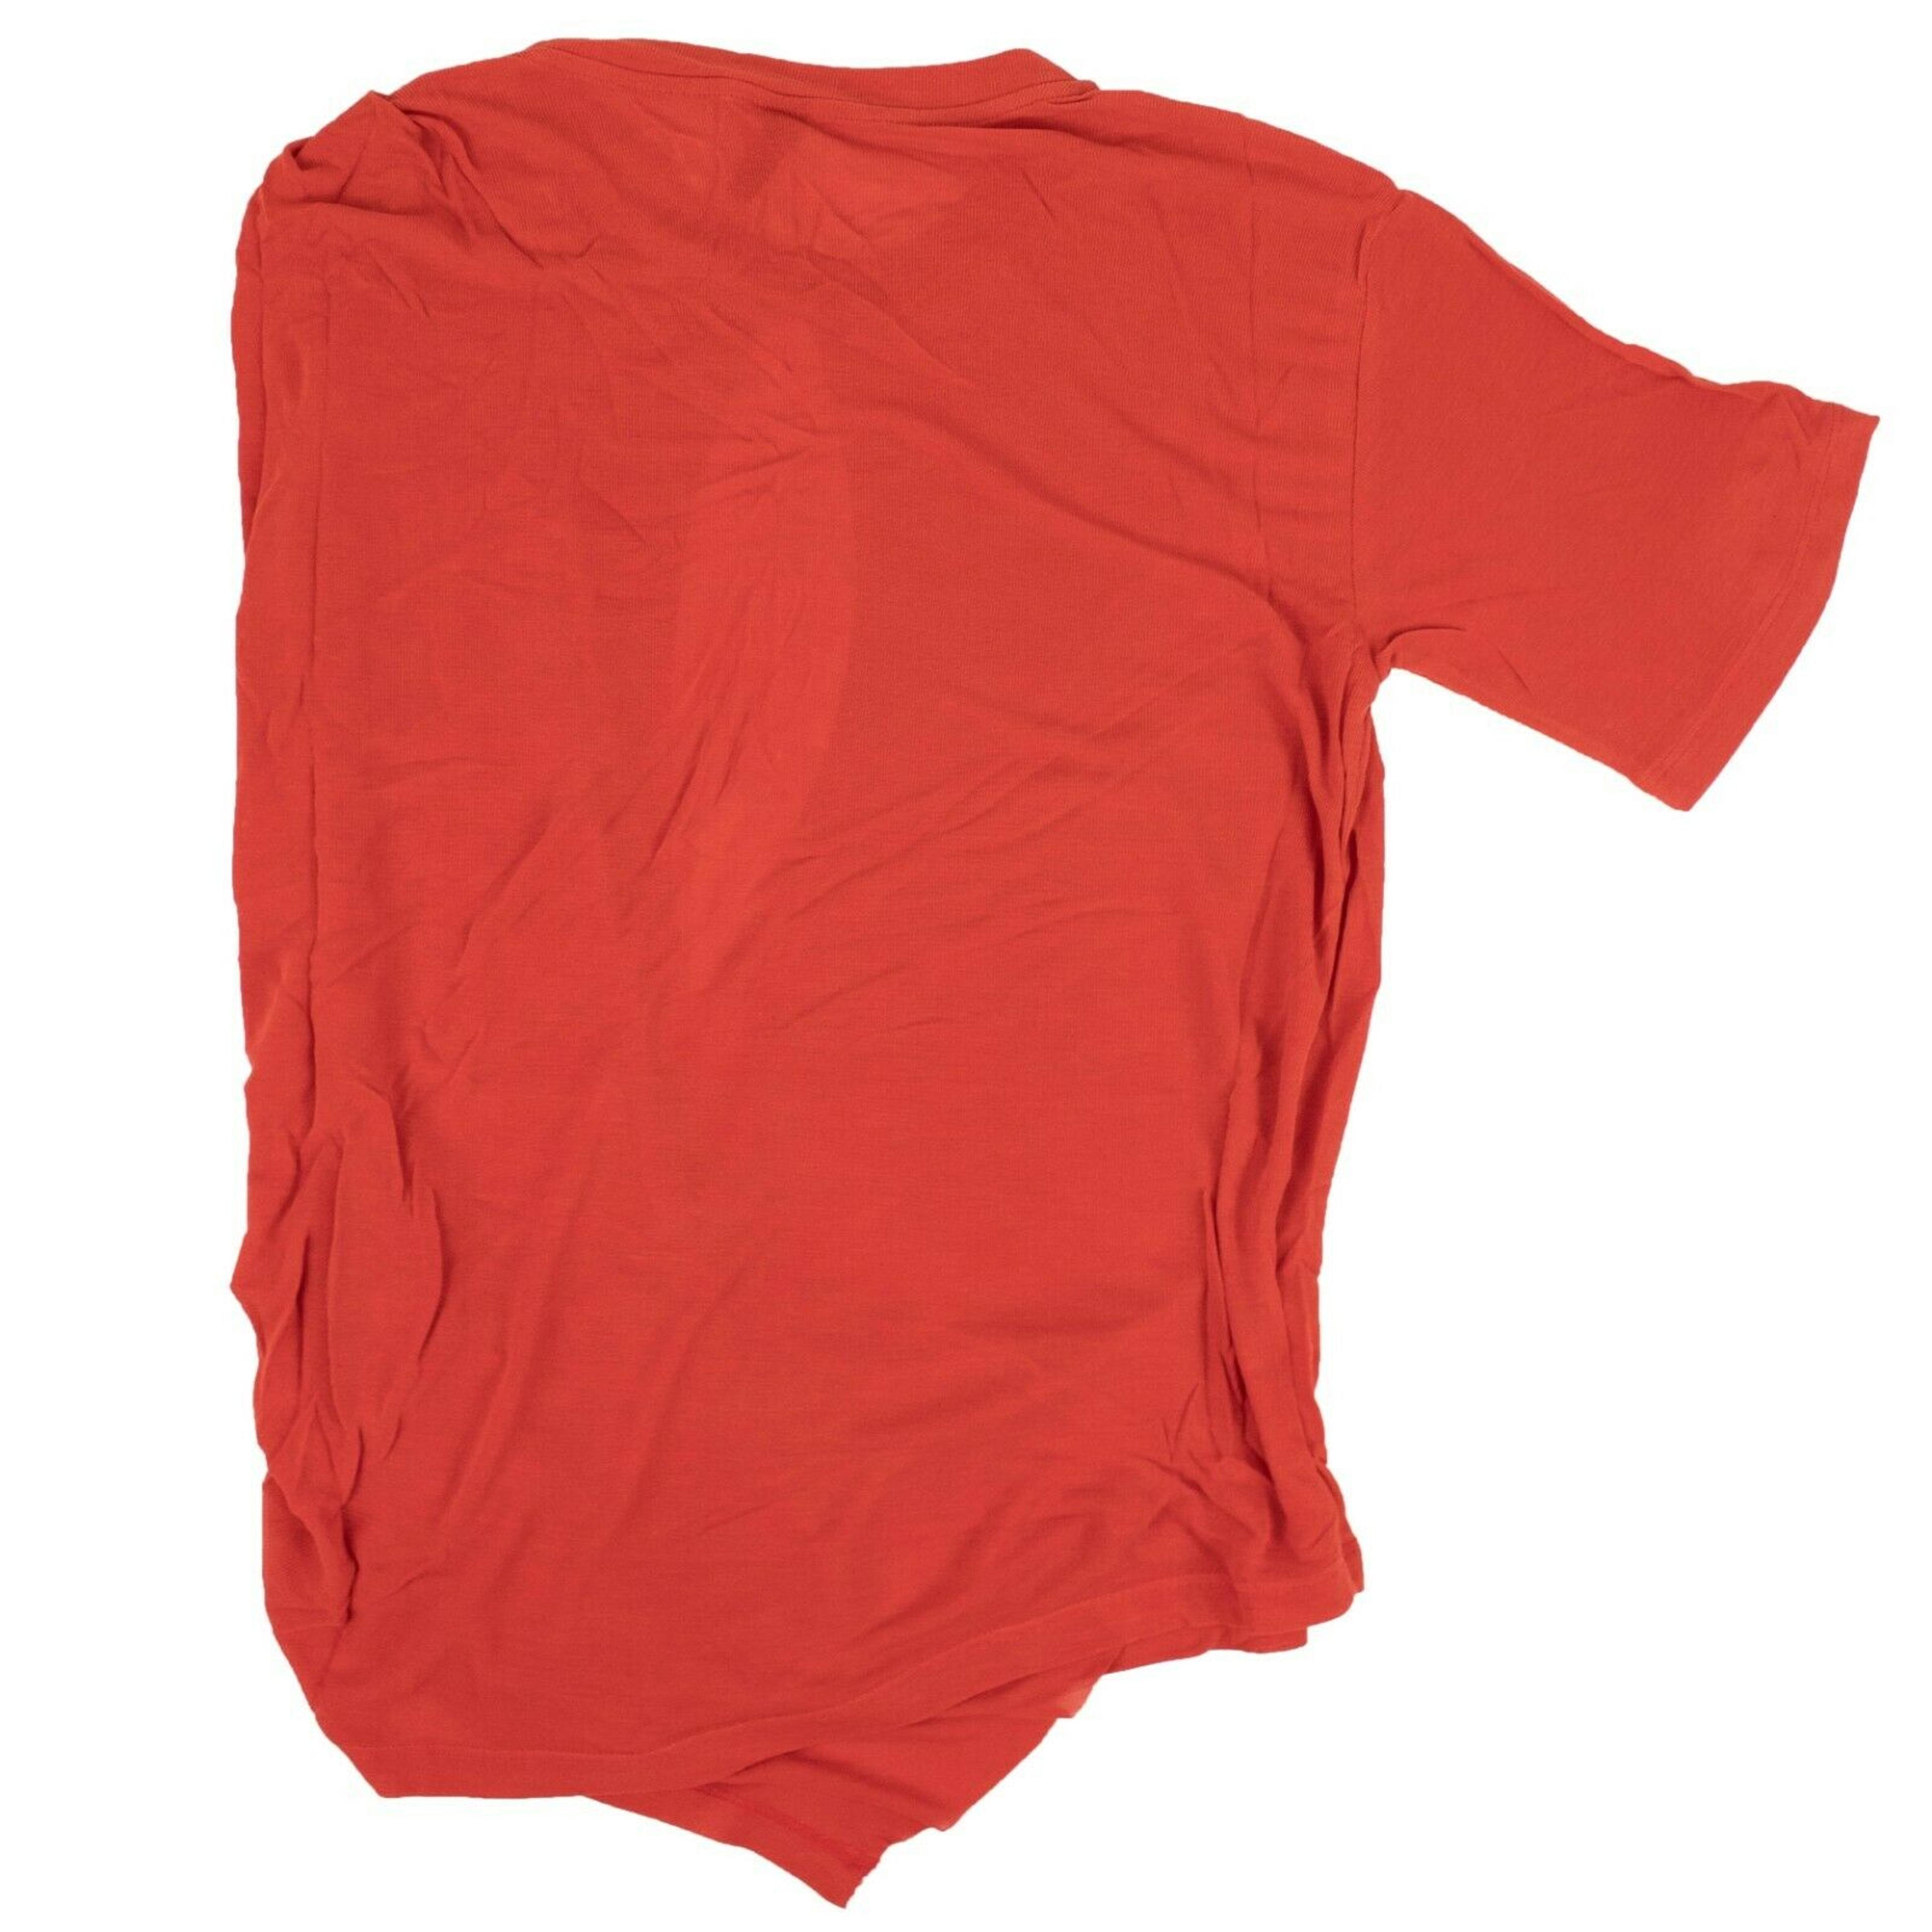 Alternate View 1 of Unravel Project Silk Draped T-Shirt - Red